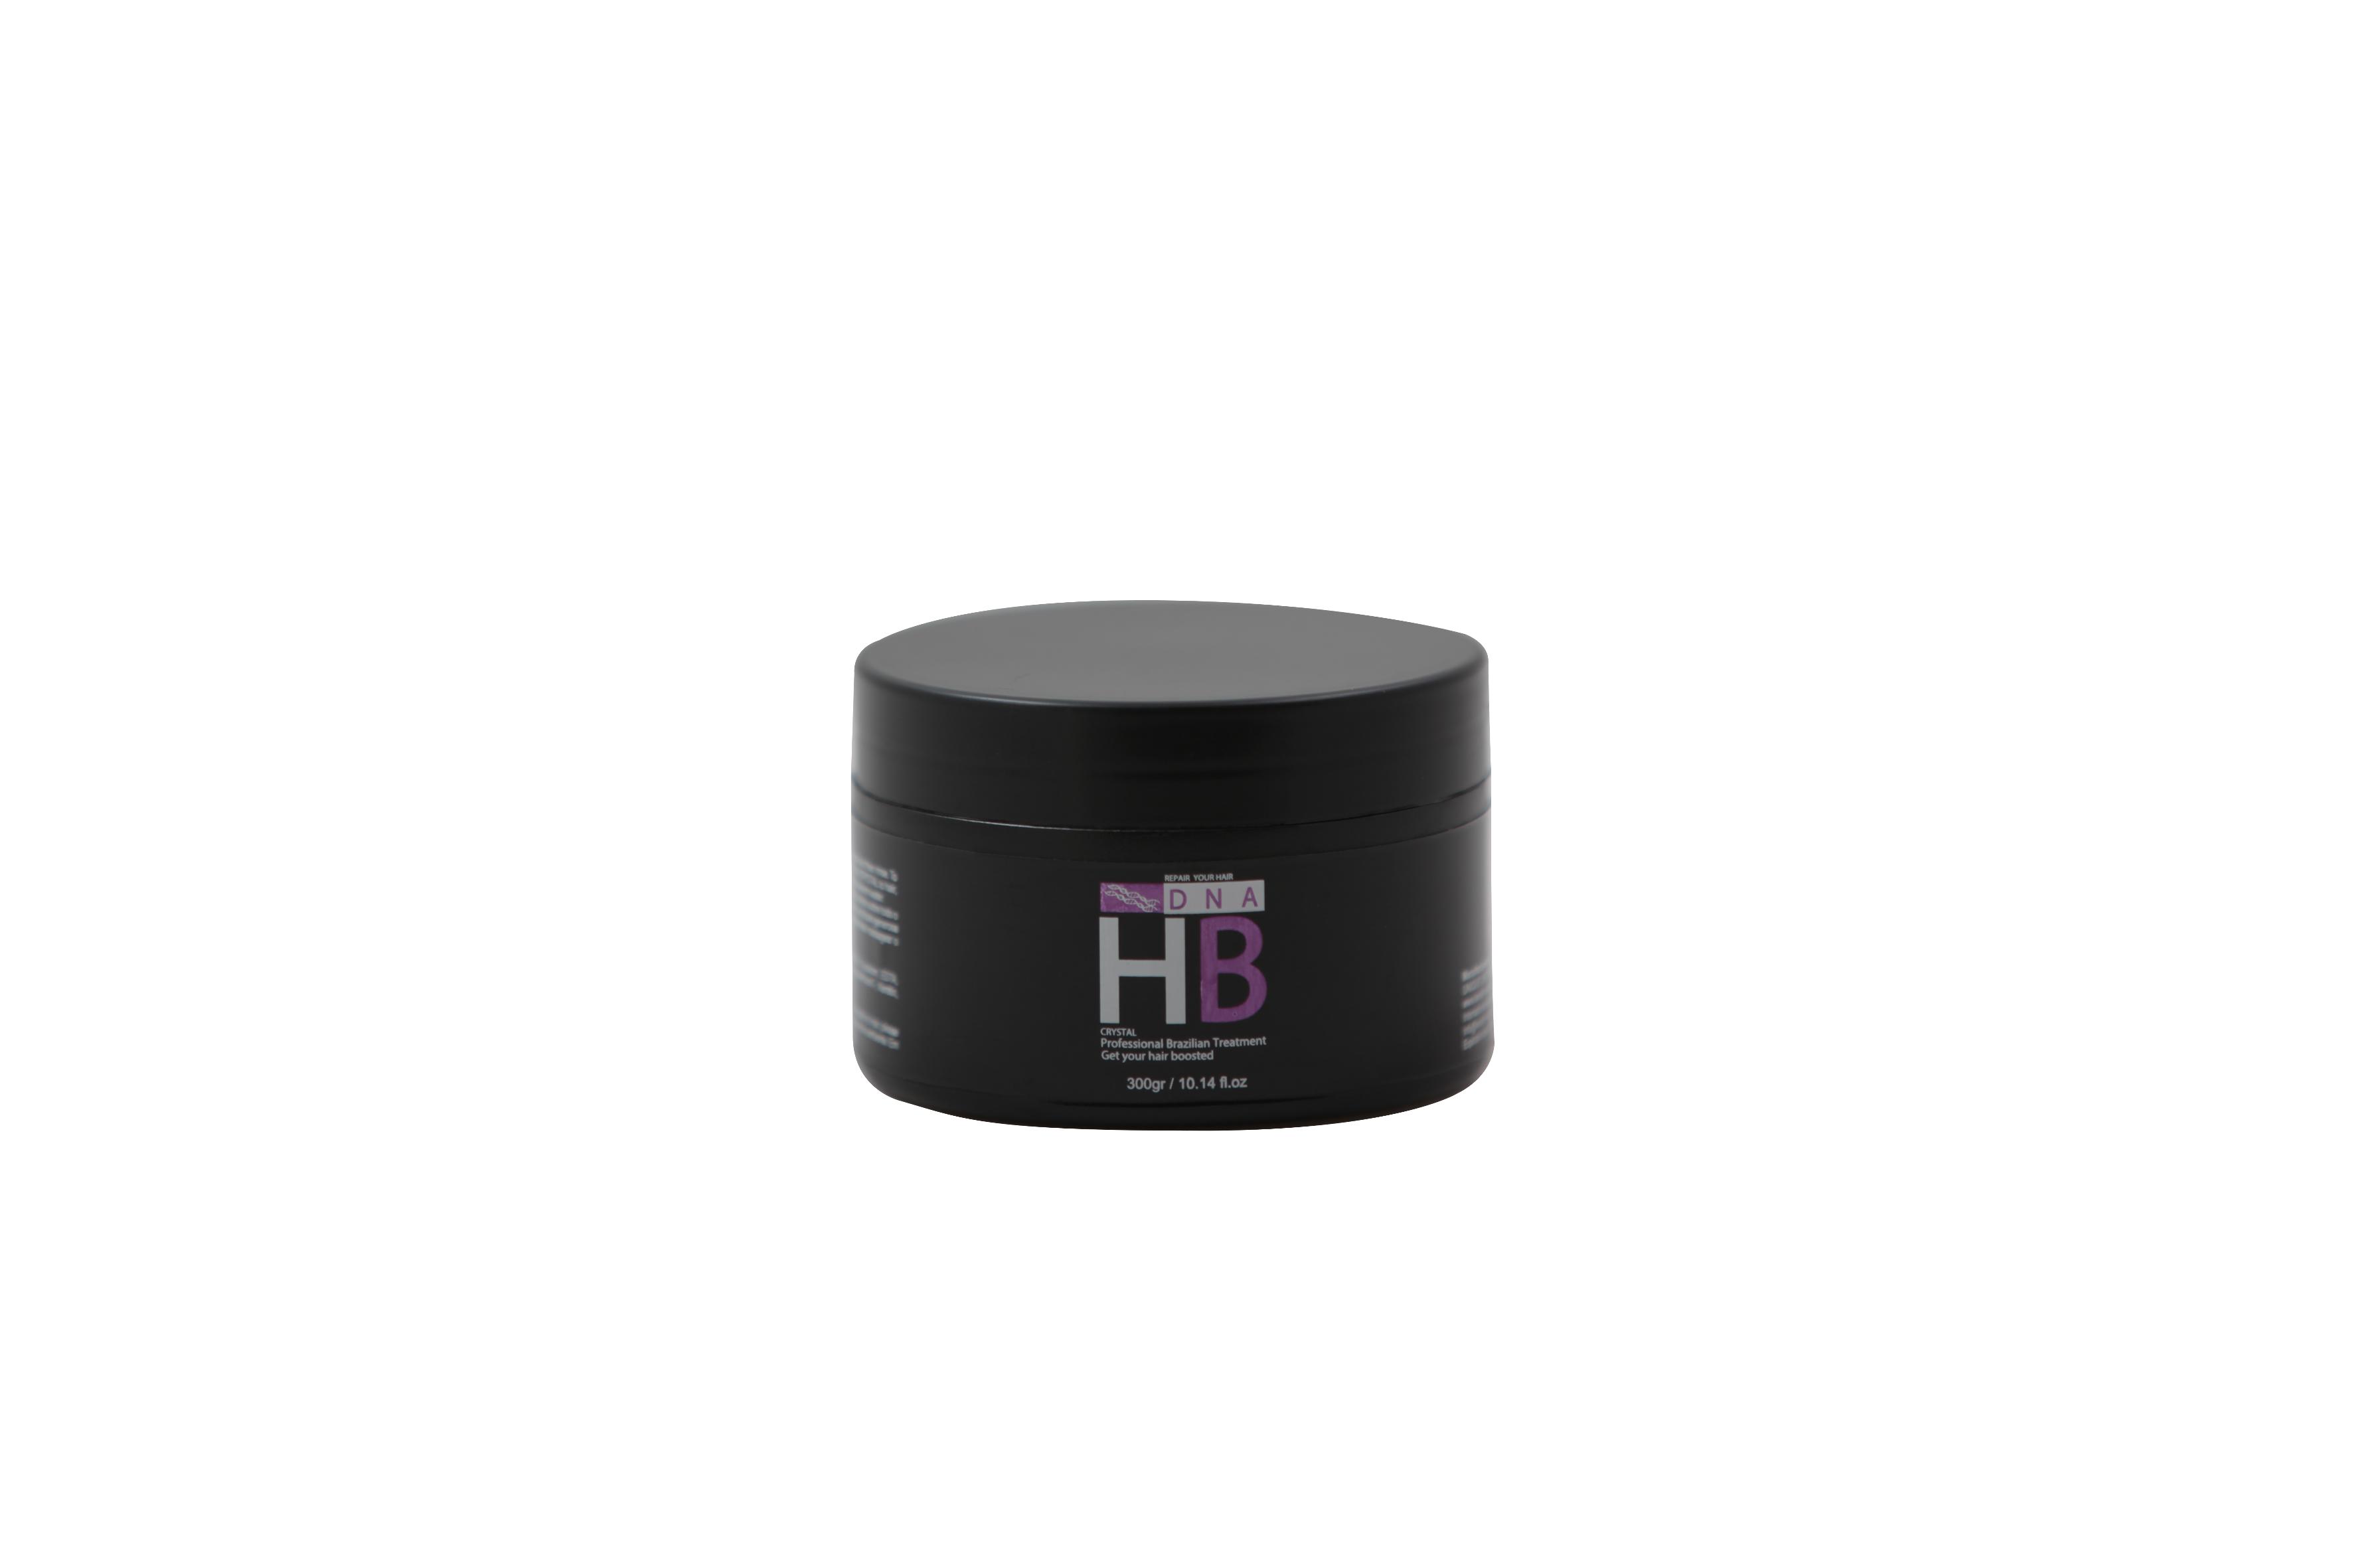 Crystal dna hb hydrating mask